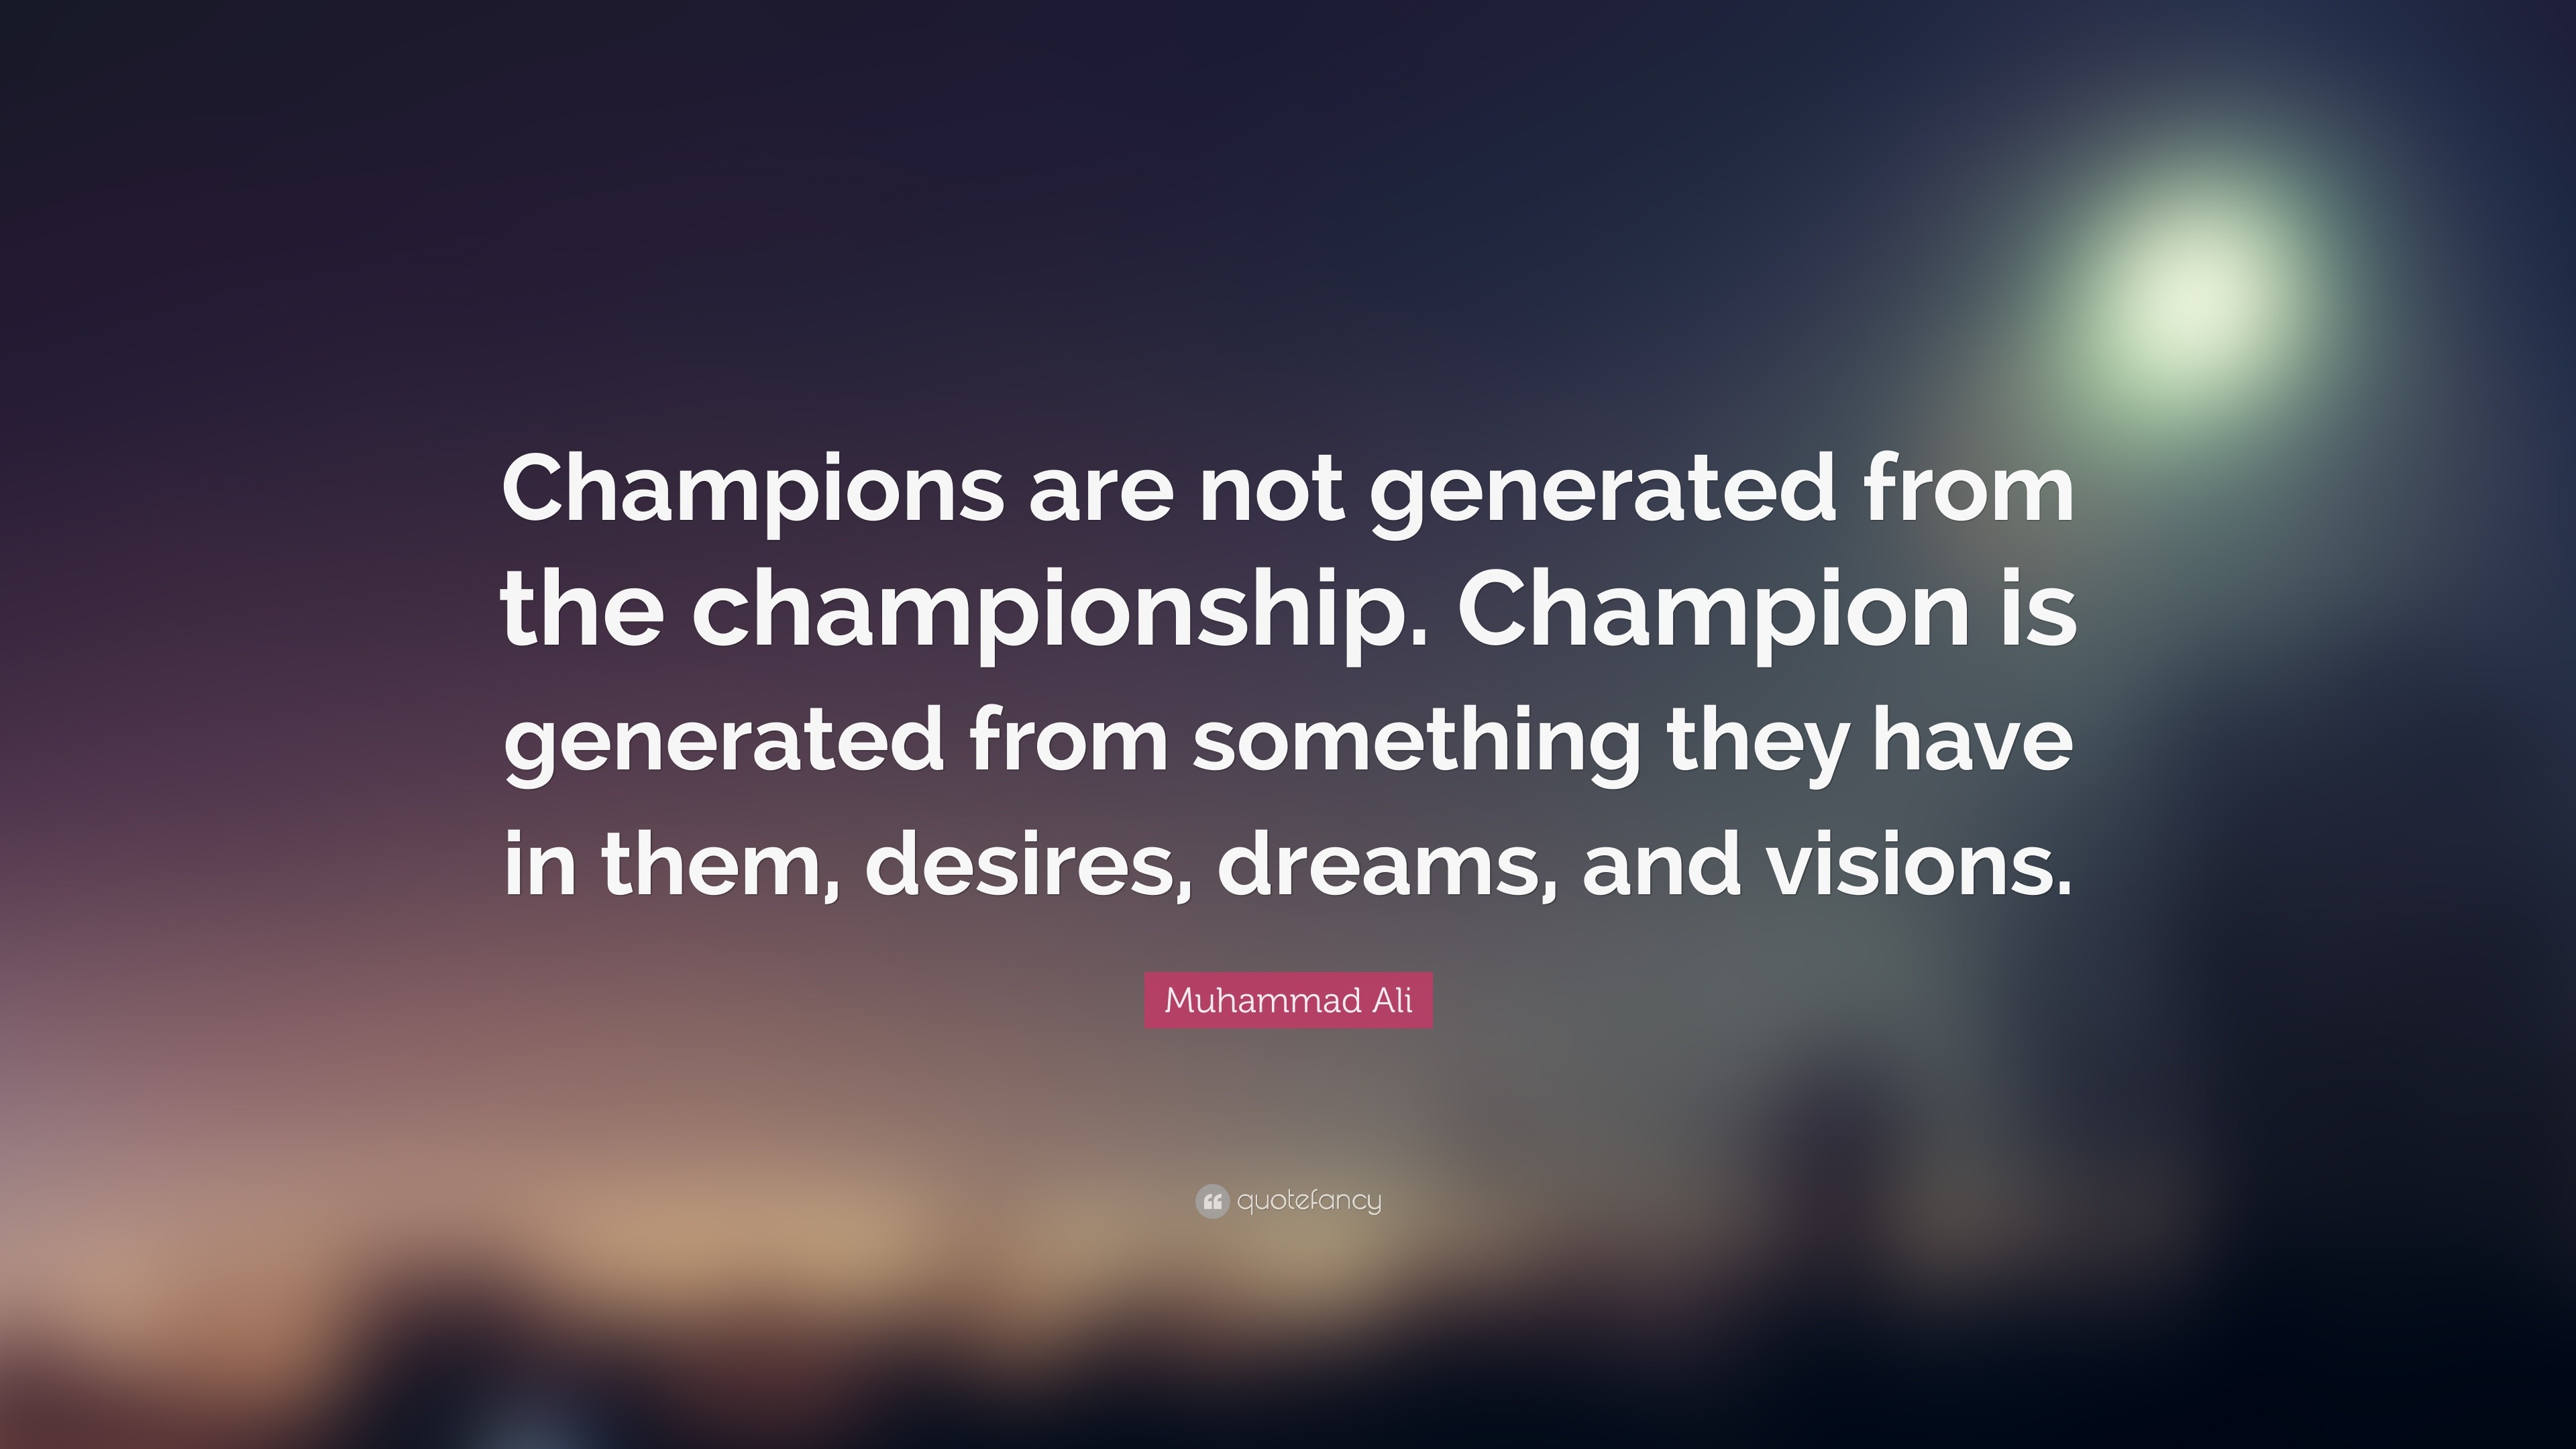 Ali Quote: “Champions are not generated from the championship. Champion is generated from something they have in them, desires, drea...”